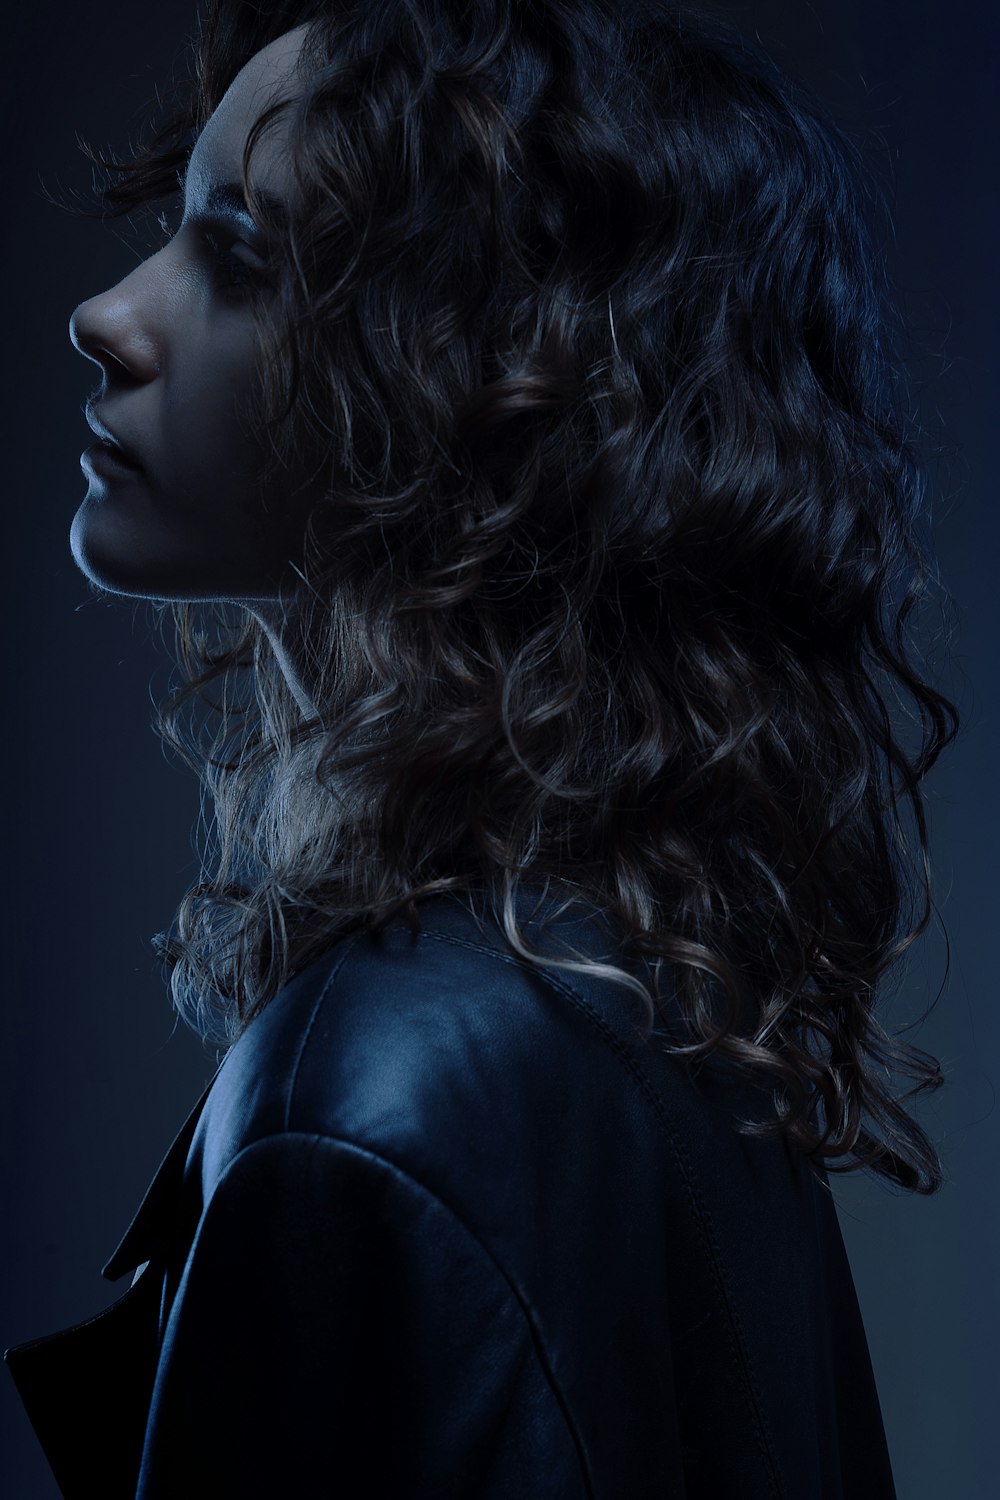 a woman with curly hair and a leather jacket